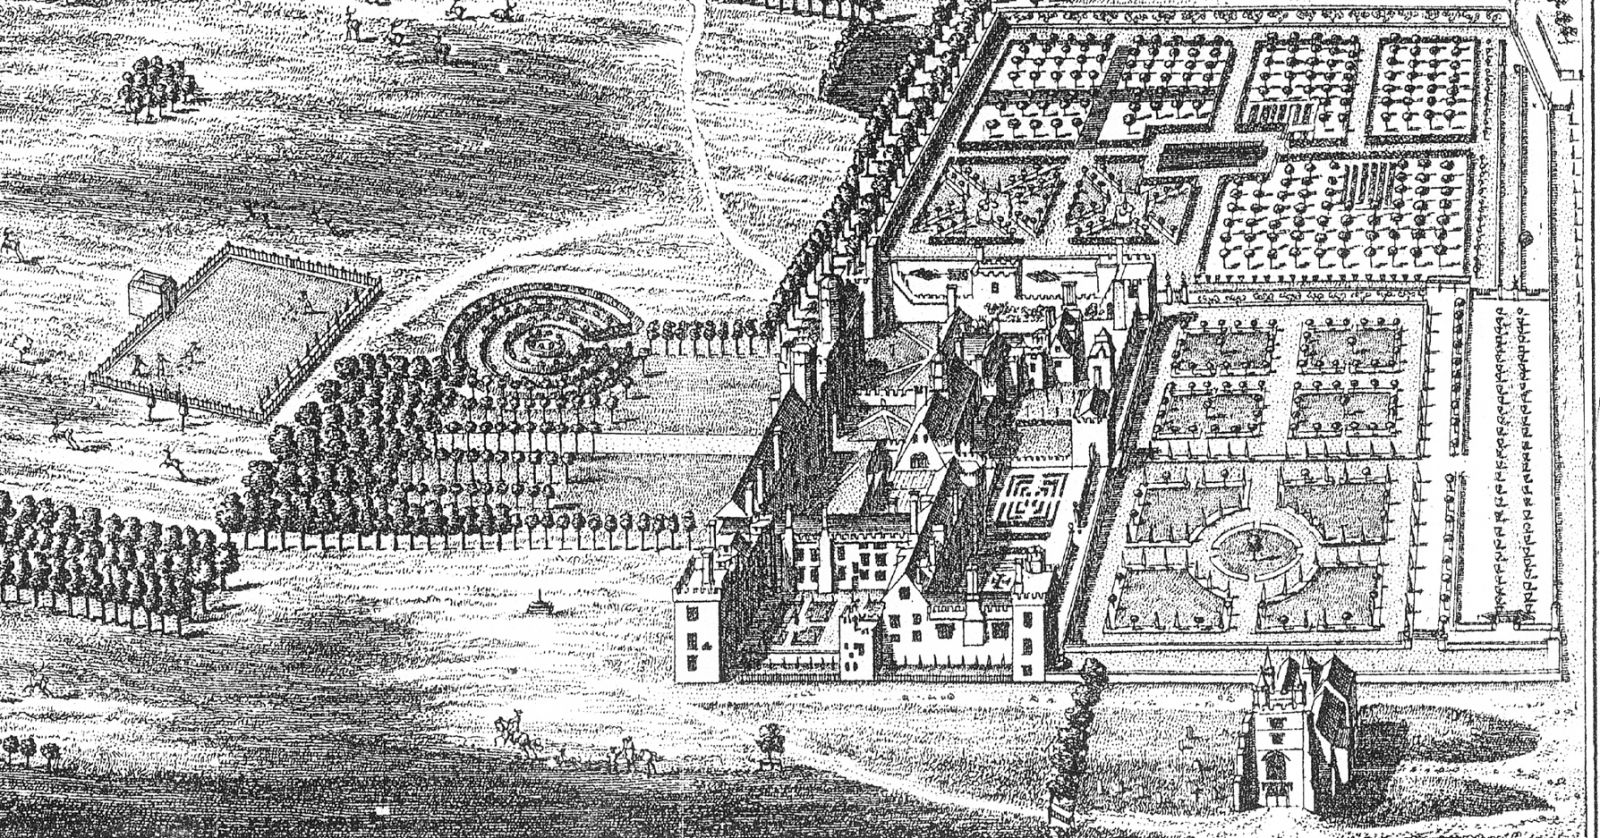 An historical image of the gardens at Penshurst Place